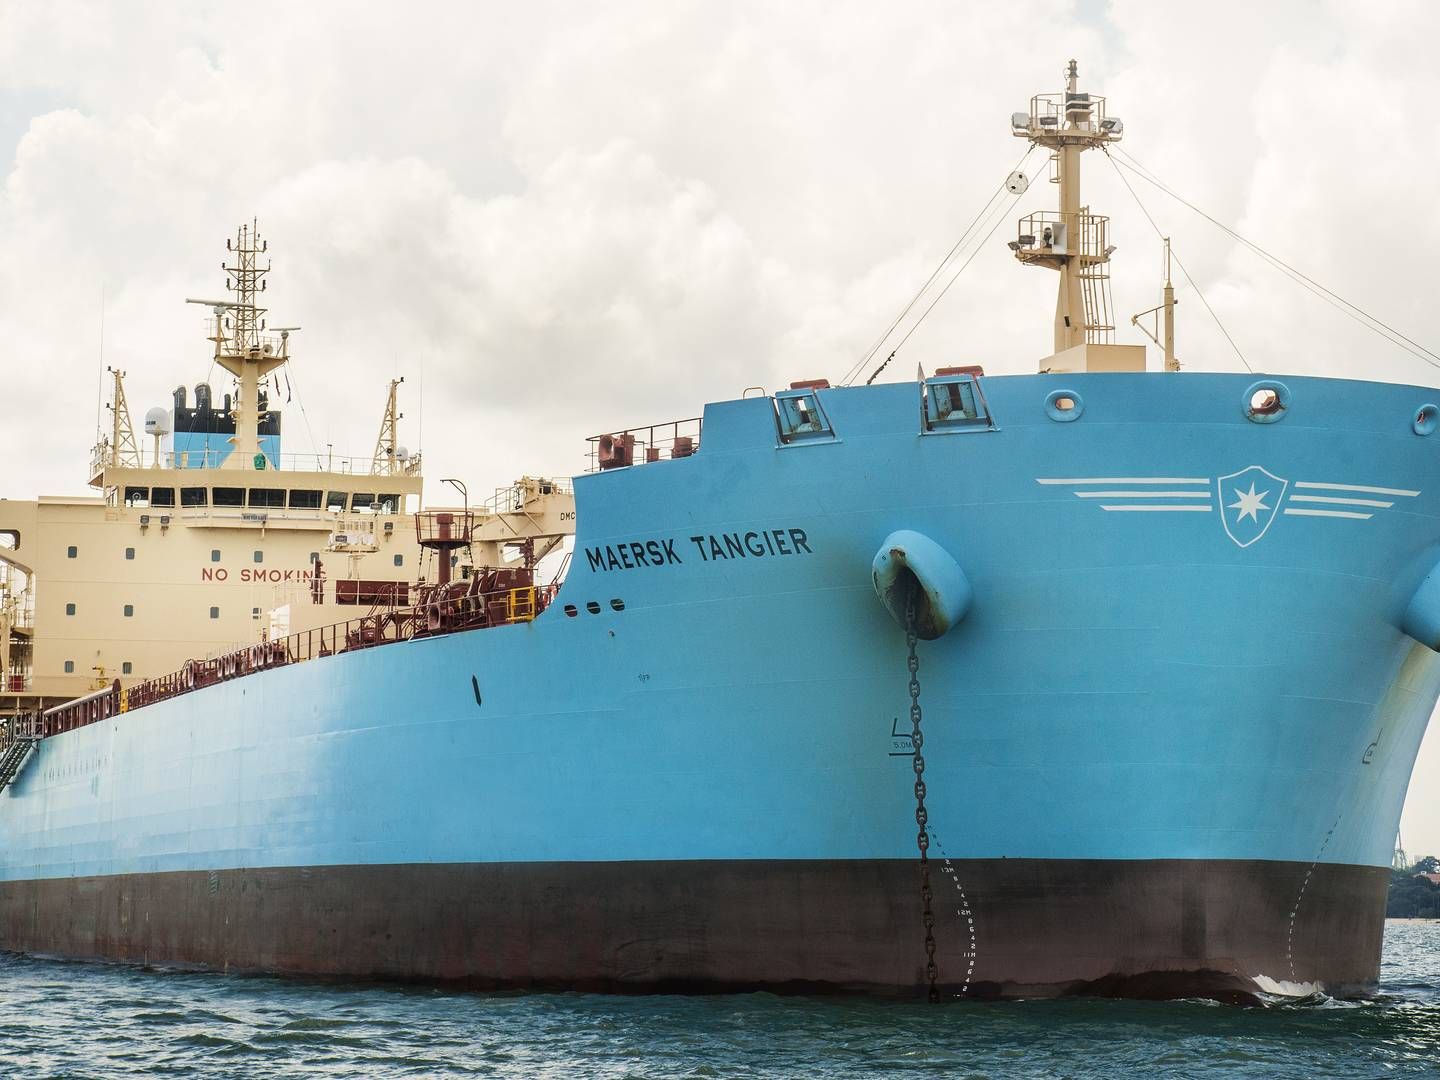 With 61 vessels, Maersk Product Tankers is among the largest shipping lines carrying refined oil products. | Photo: PR / Maersk Tankers